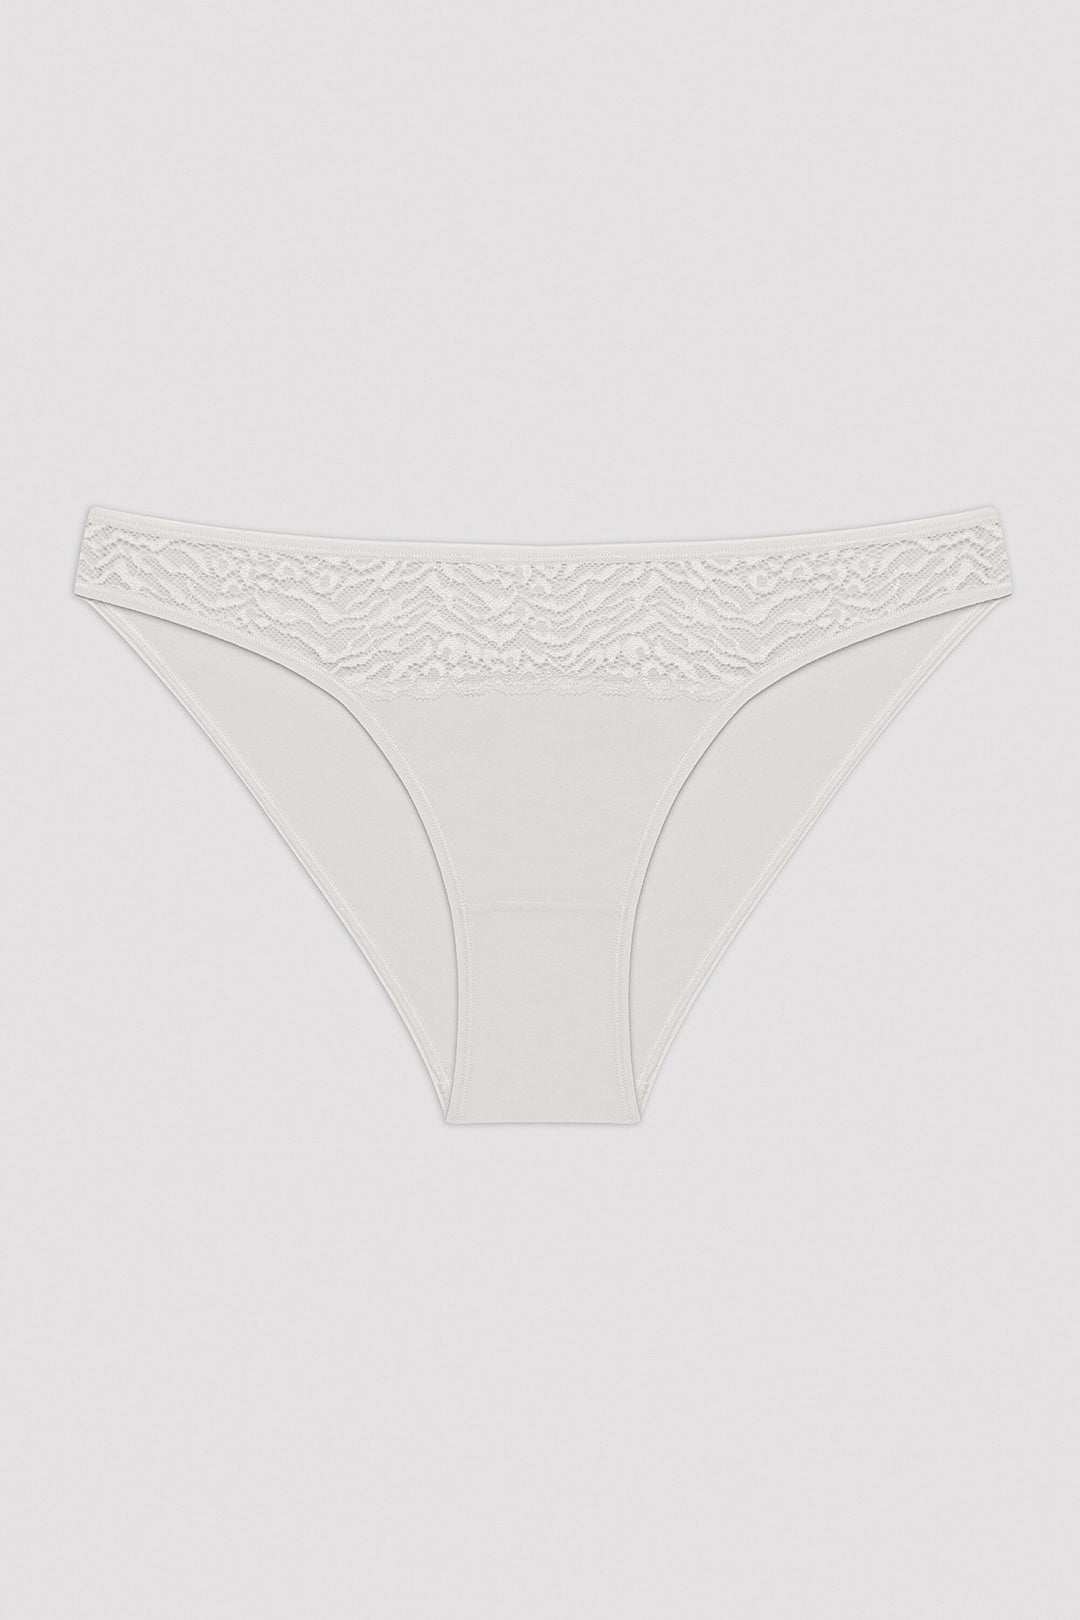 Whisper Lacy Lace Multicolored 3-Piece Slip Panties